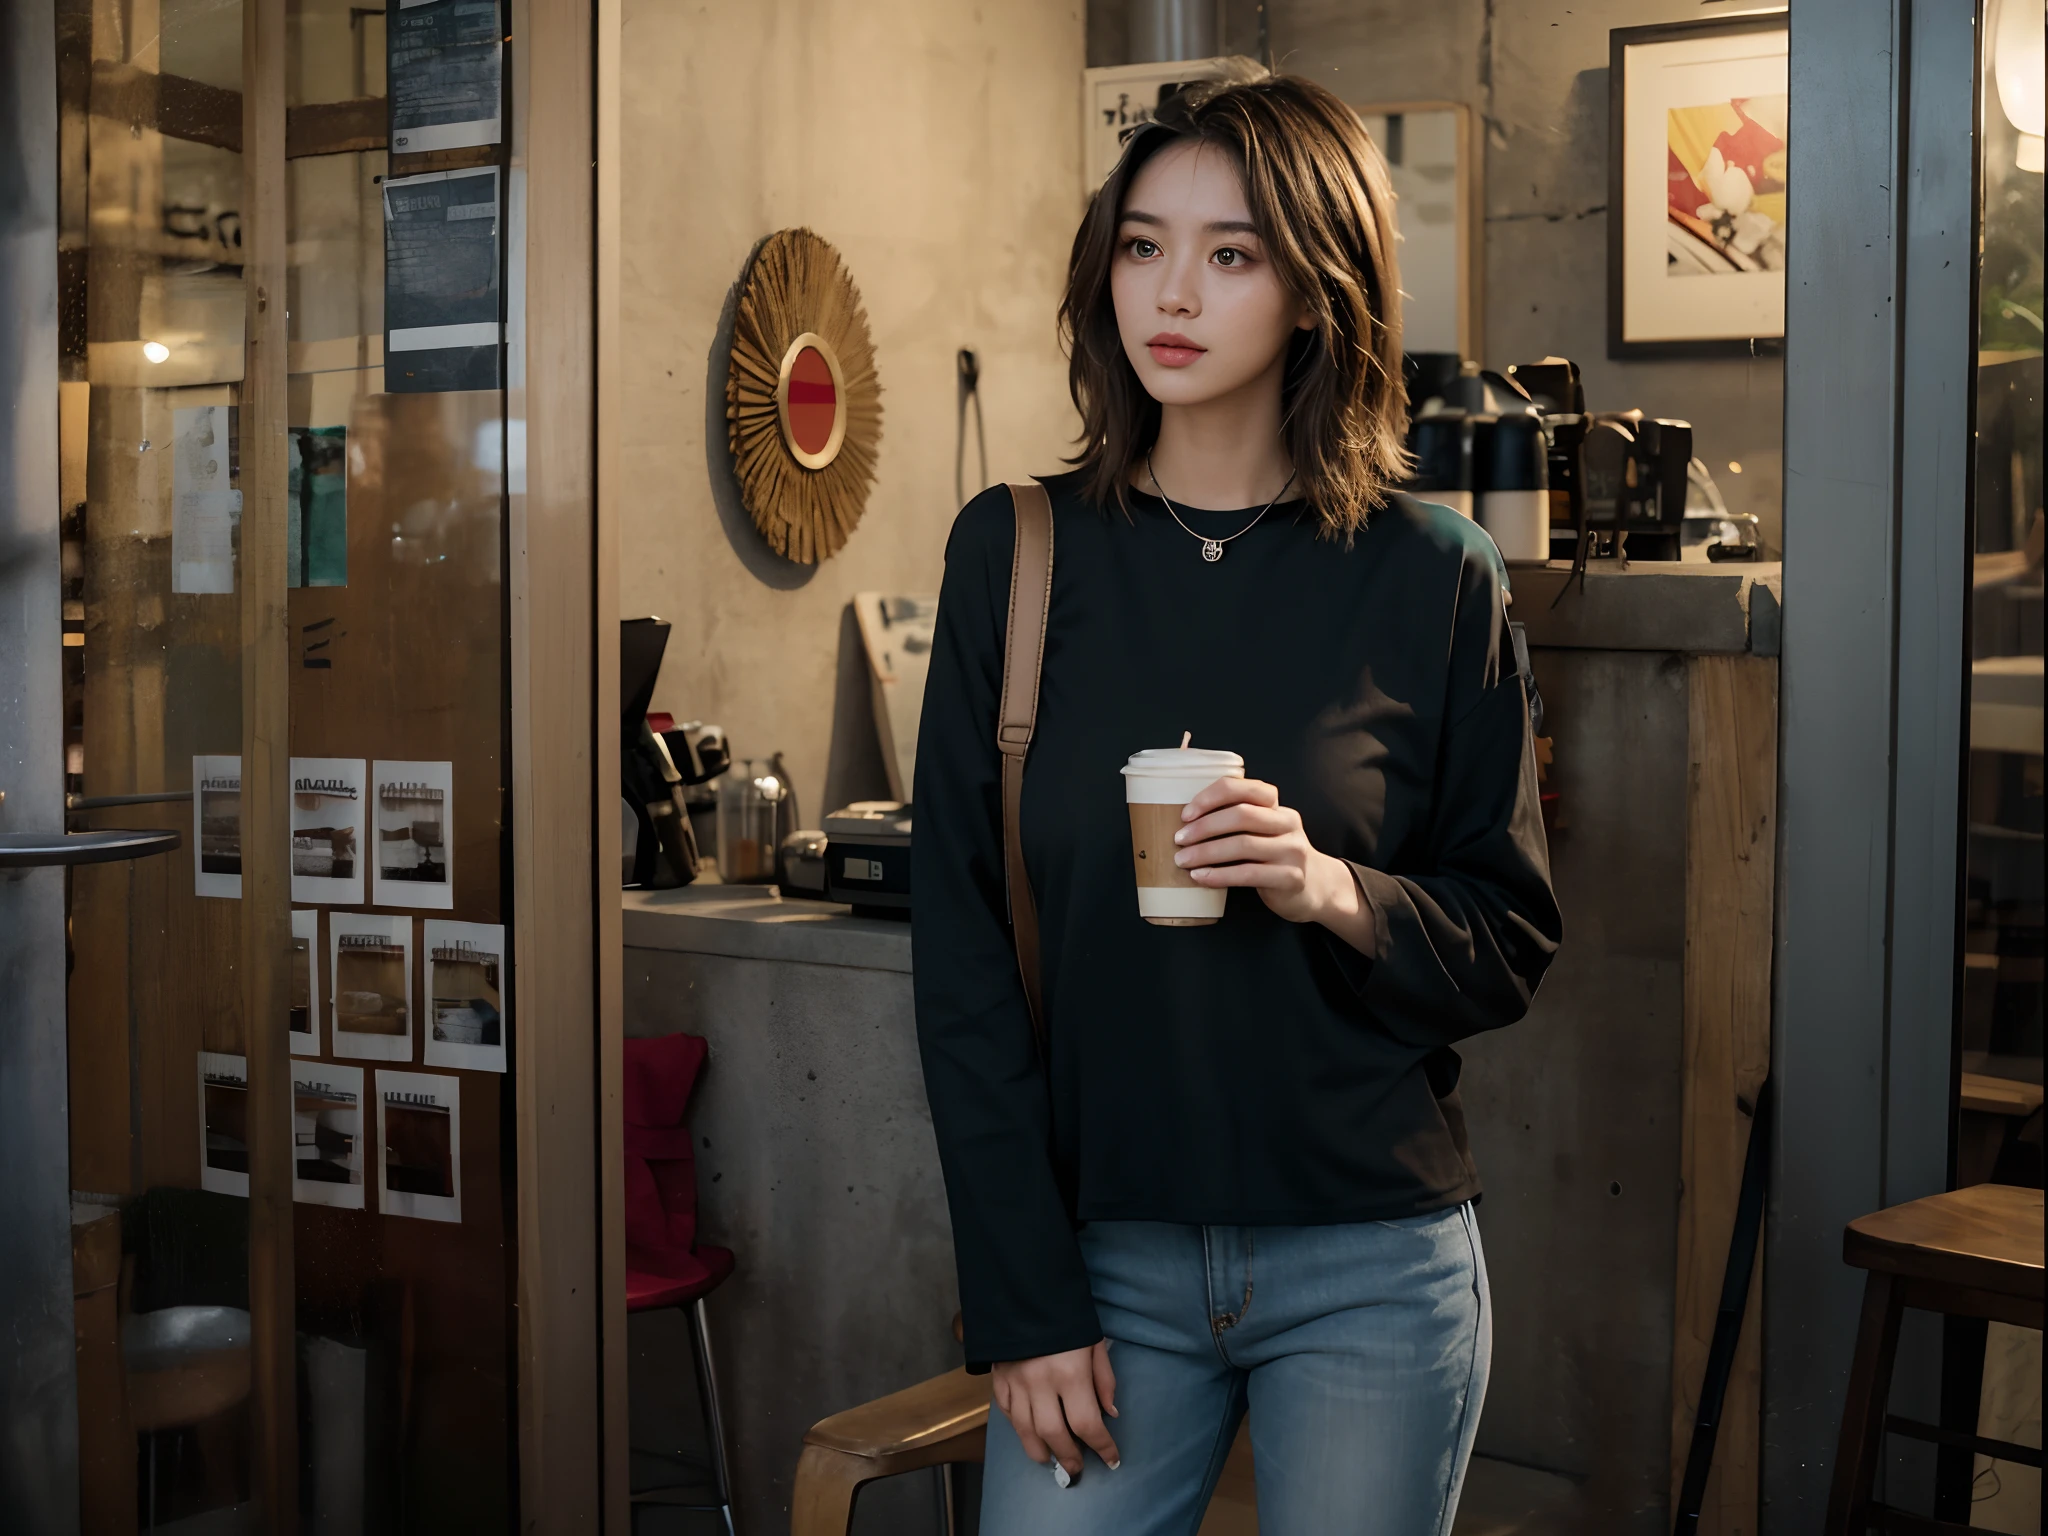 best quality,8k,highres,masterpiece:1.2),ultra-detailed, wall gray muted in background photo :1.37, (Germanian mix Irish Chic face girl 22 years old with asian nose. ) there is a woman standing in a doorway holding a cup of coffee, mysterious coffee shop girl, looking in front, in a coffee shop, enjoying coffee at a coffee shop, photo still, exclusive, small hipster coffee shop, standing in front of a door with sign Open, face in-frame, aesthetic shot, (Ambient occlusion on detailed, portrait at a window cinematic Natural Low lights cast shadow in the background and super low lights key lights in front to create dramatic realistic ) , natural less makeup look little sweat, ( bob layered short hair, dark brown hair with blonde highlights hair color, messy sweating hair after sport hair looks too hot too handle. ( she wearing summer outift details is Combine the denim cutoffs and a tied-up graphic tee, Add a sheer or lace kimono for a hint of allure, Swap ankle booties for strappy, Choose a crossbody bag with a chain strap for a chic touch, and wear a statement necklace for added allure ) , ( creating pose small collosal body and chest and sensual looks inviting comfort chest and hips) , (Holding a takeaway iced white coffee Latte and no bad fingers) , warm key lights from right behind her, and low key lights from front her. UHD, natural side sunlight's and cast shadow on side, in the interior concrete coffee bar and roastery, duo tone, architectural concrete brutalism, Analog filter lomography Xpro